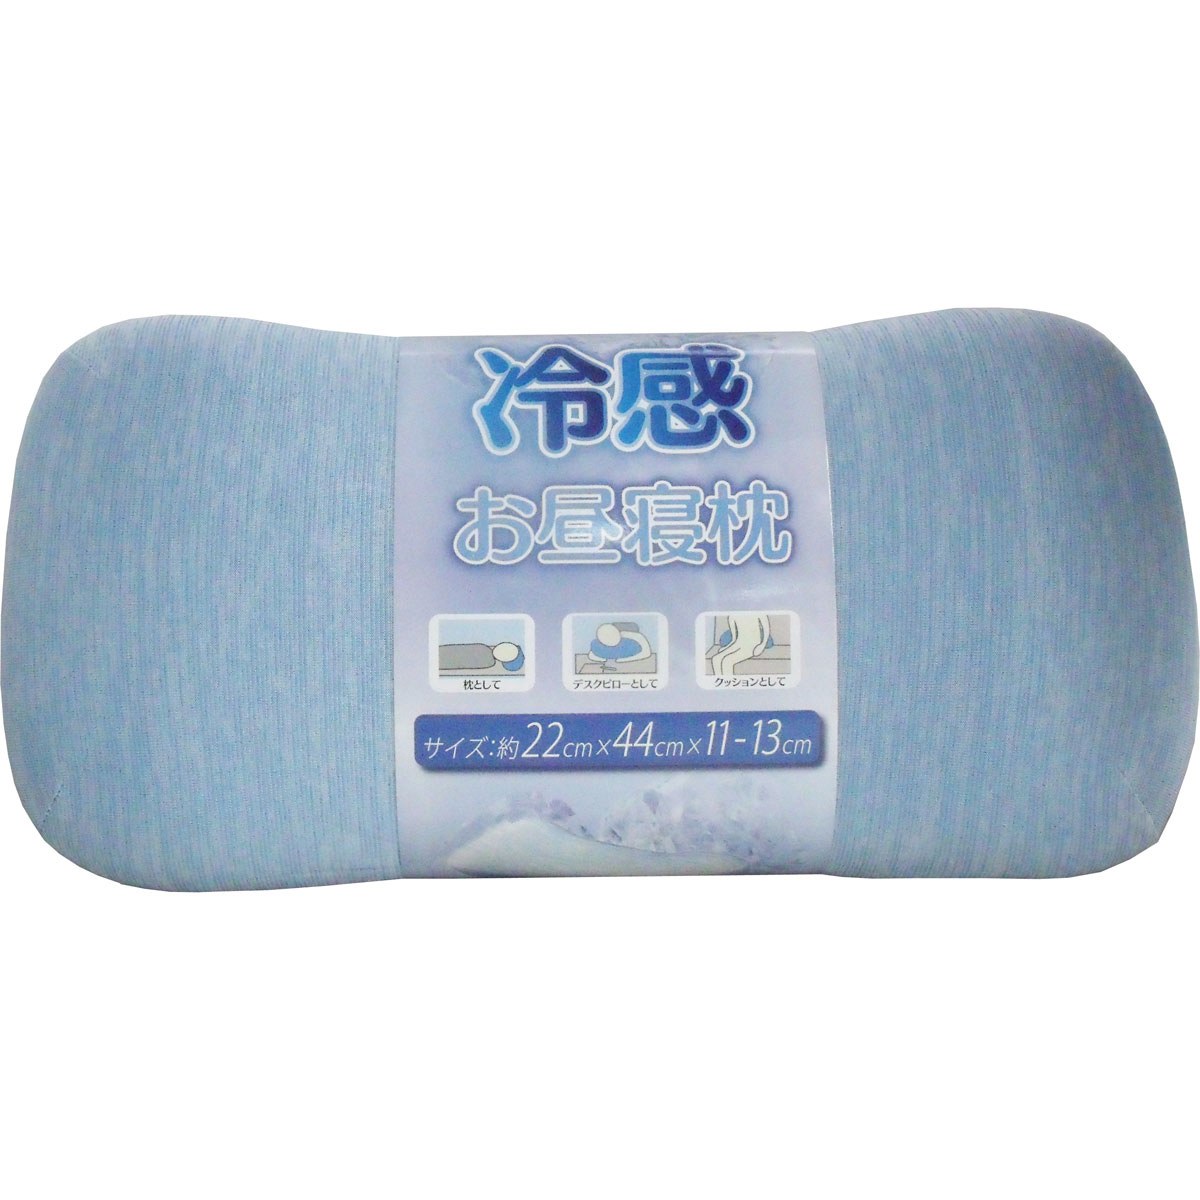 Picture of Saxe Blue color Cool Touch Pillow For a Nap